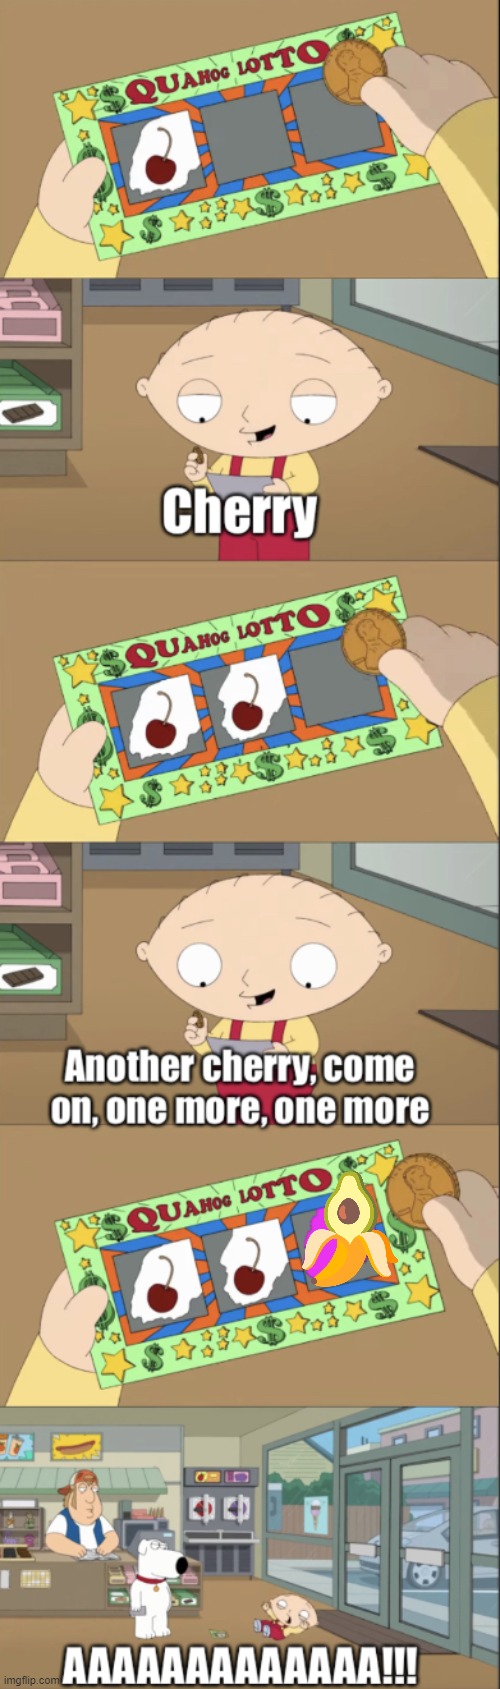 AW HELMG GNAWR | image tagged in stewie scratch card | made w/ Imgflip meme maker